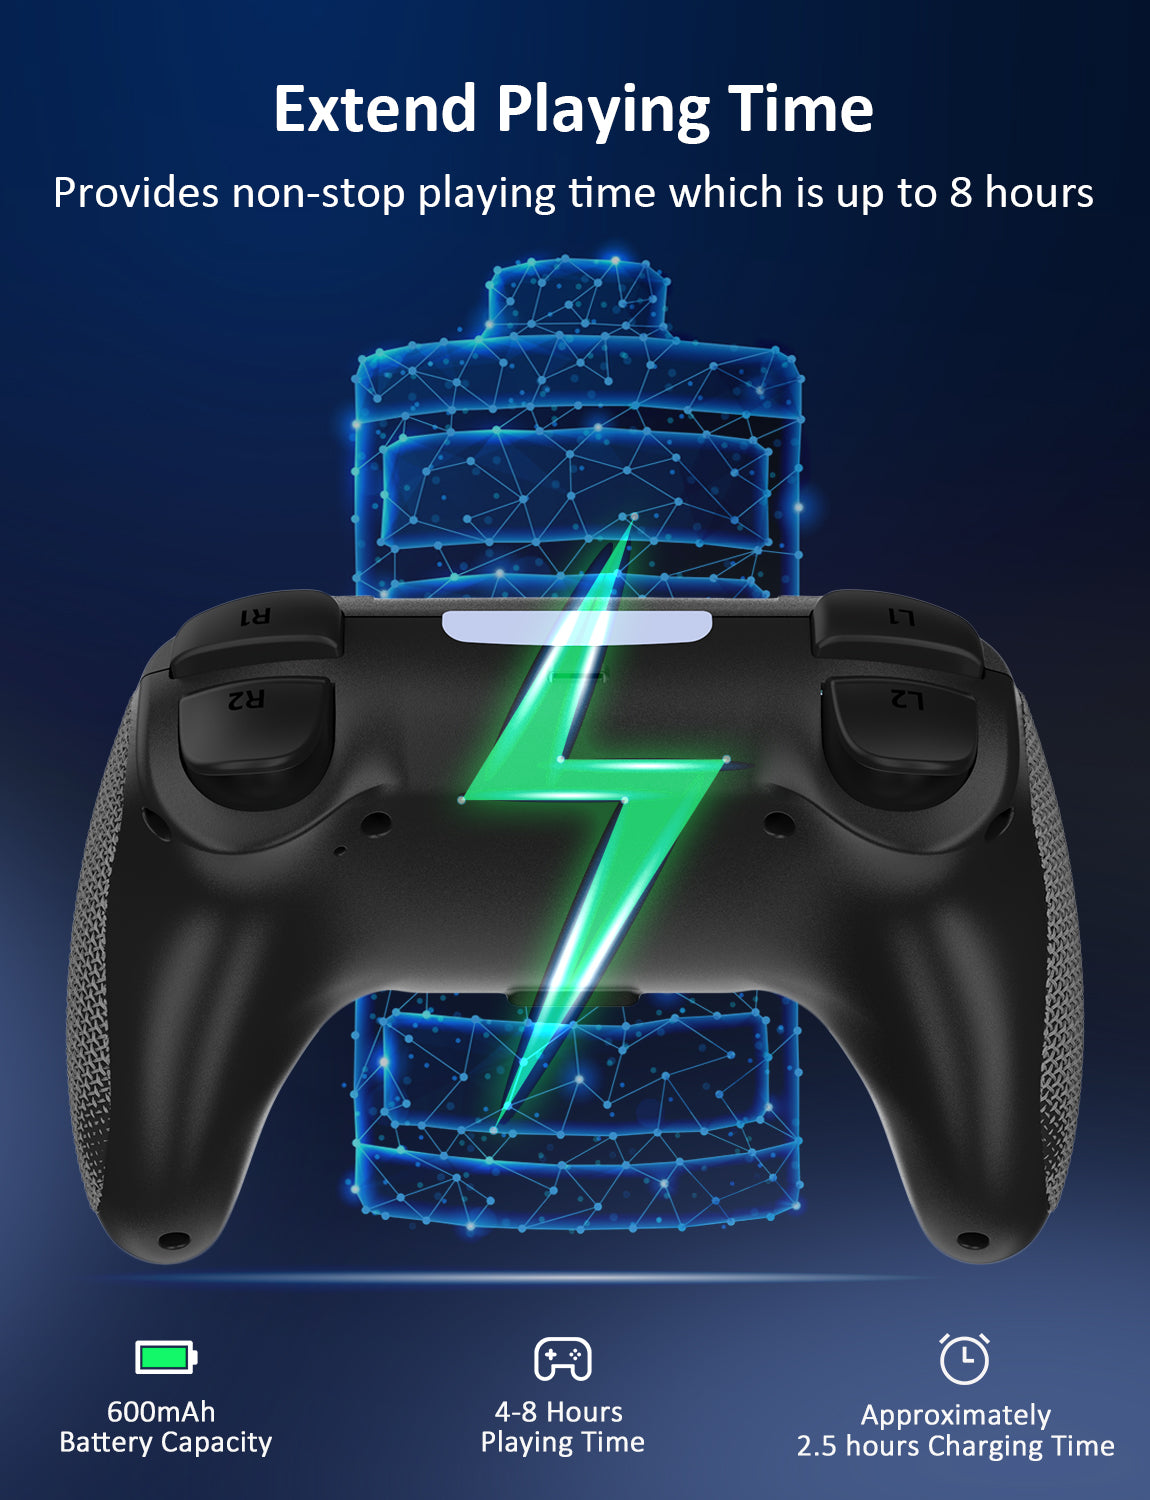 PS4 controller offers up to 8 hours of uninterrupted playtime.